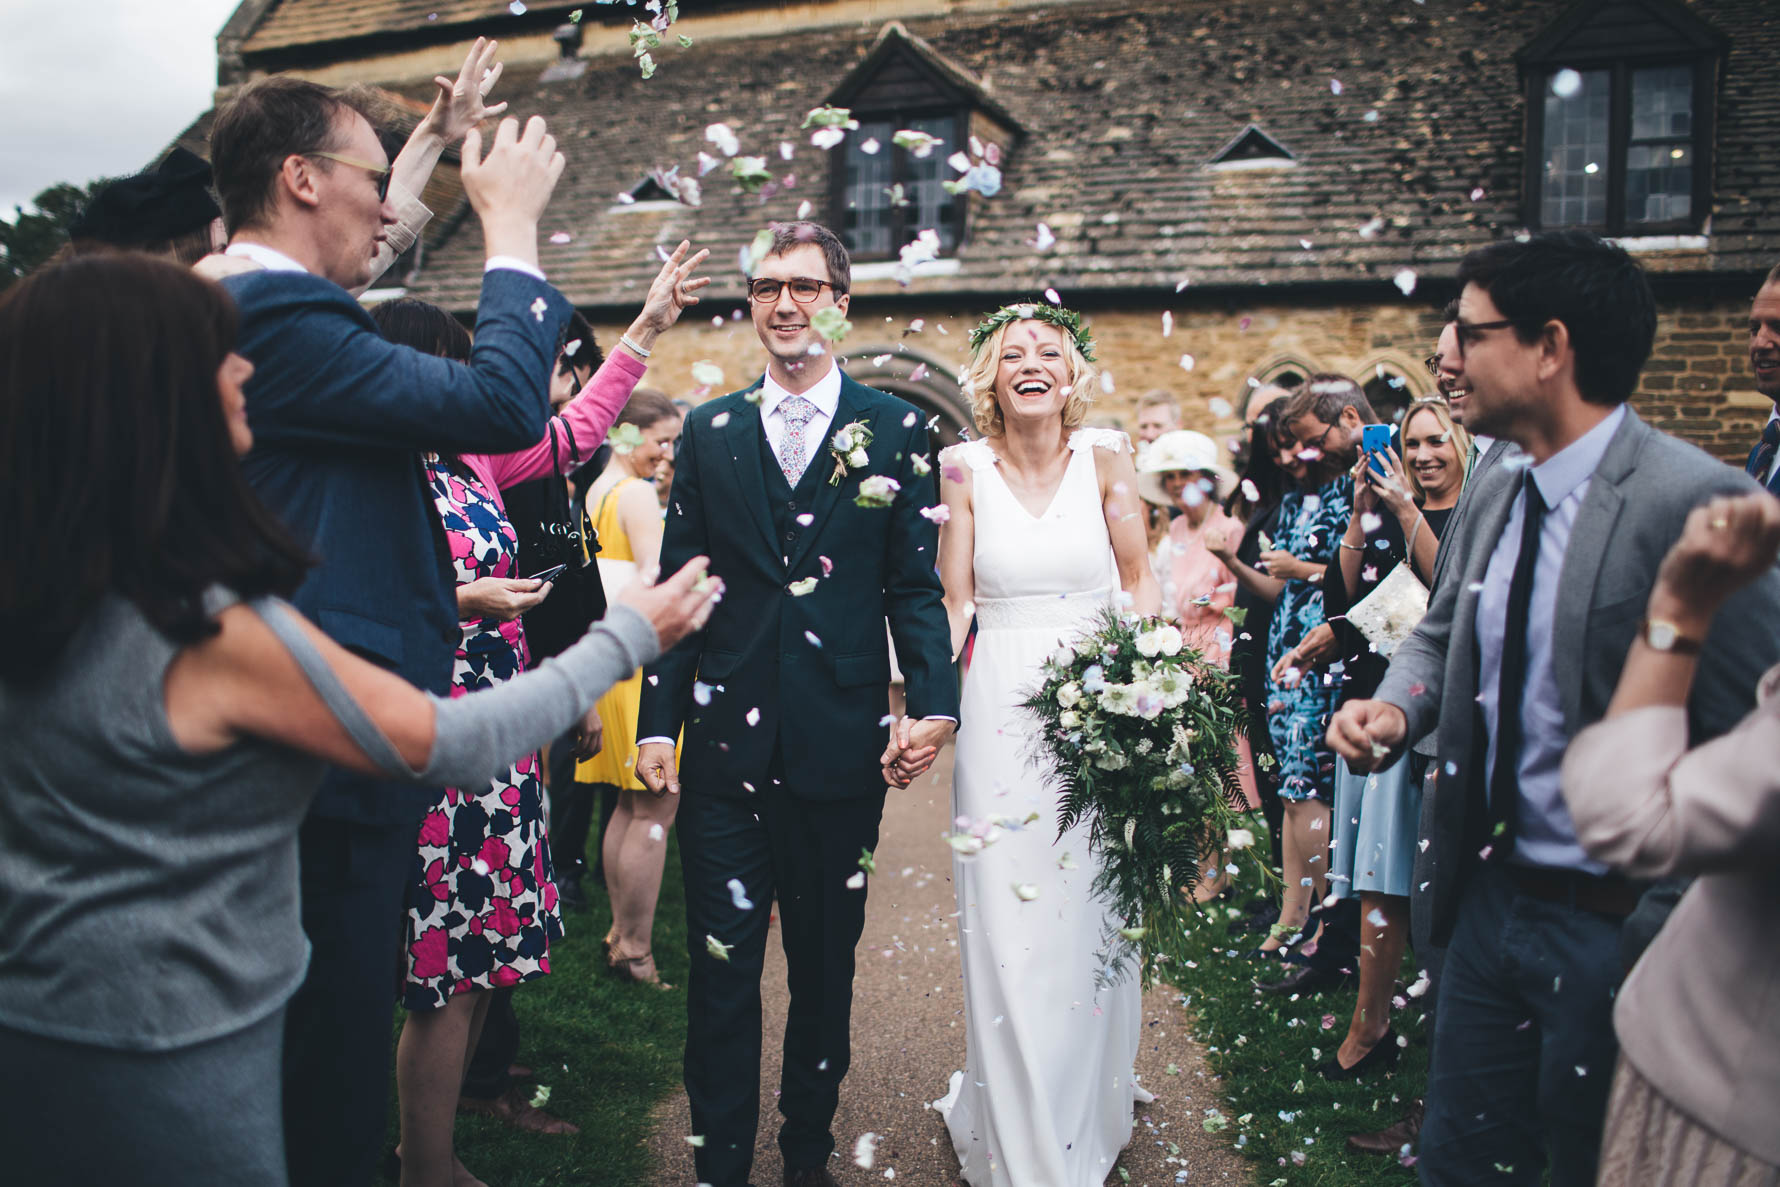 Confetti shot with the bride and groom walking down the path outside the Great Hall at Oakham Castle